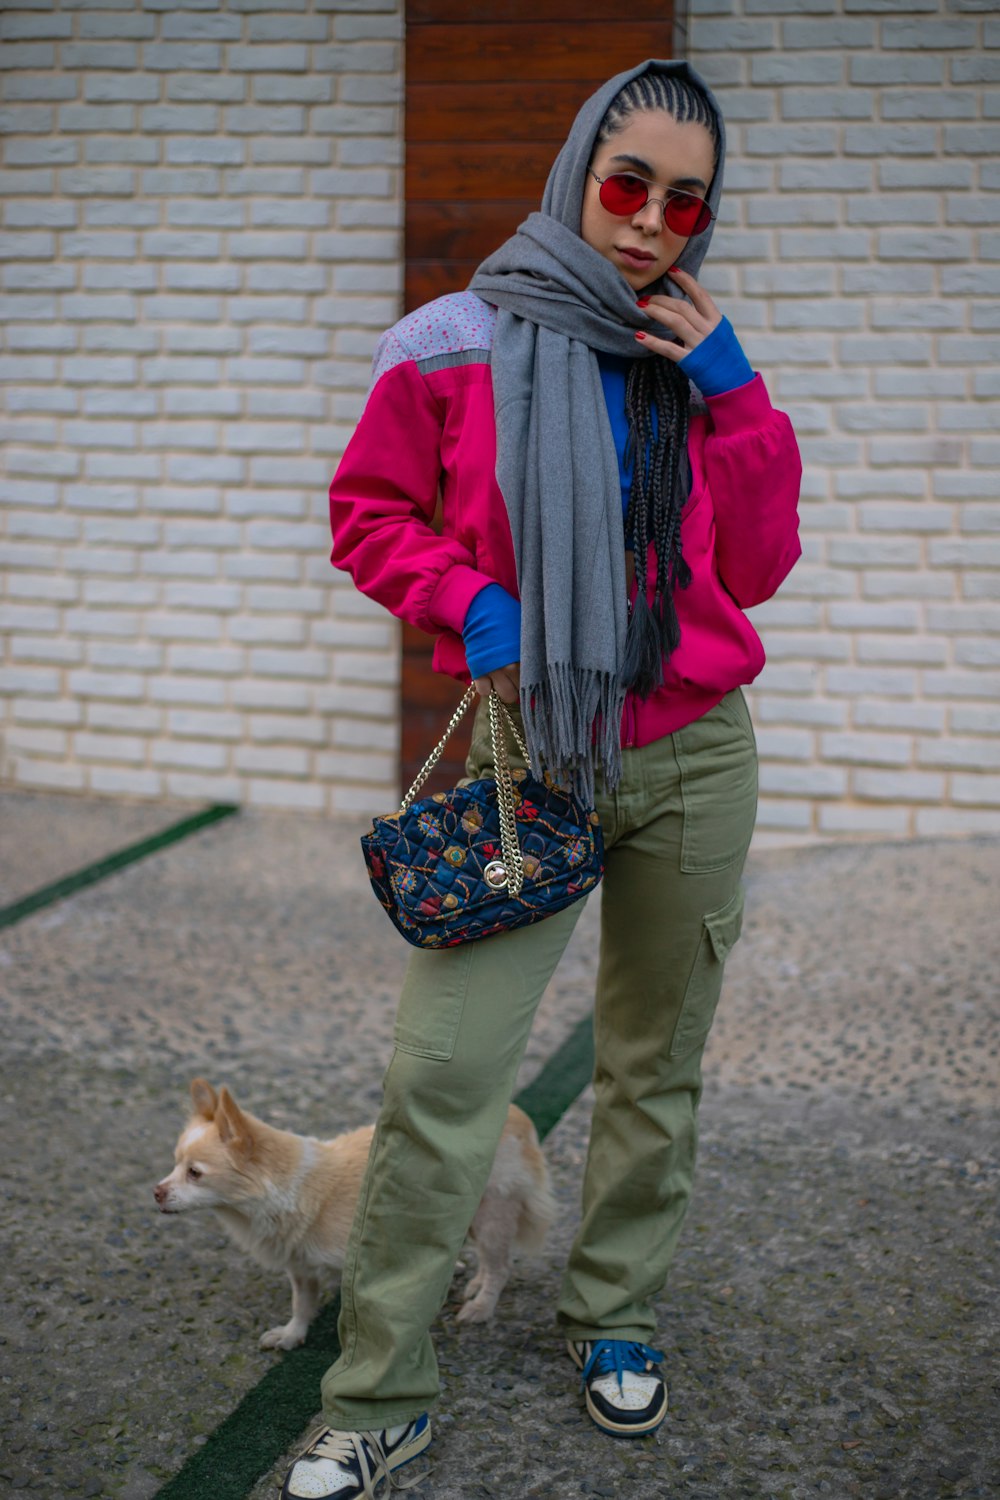 a woman in a pink jacket and scarf standing next to a dog